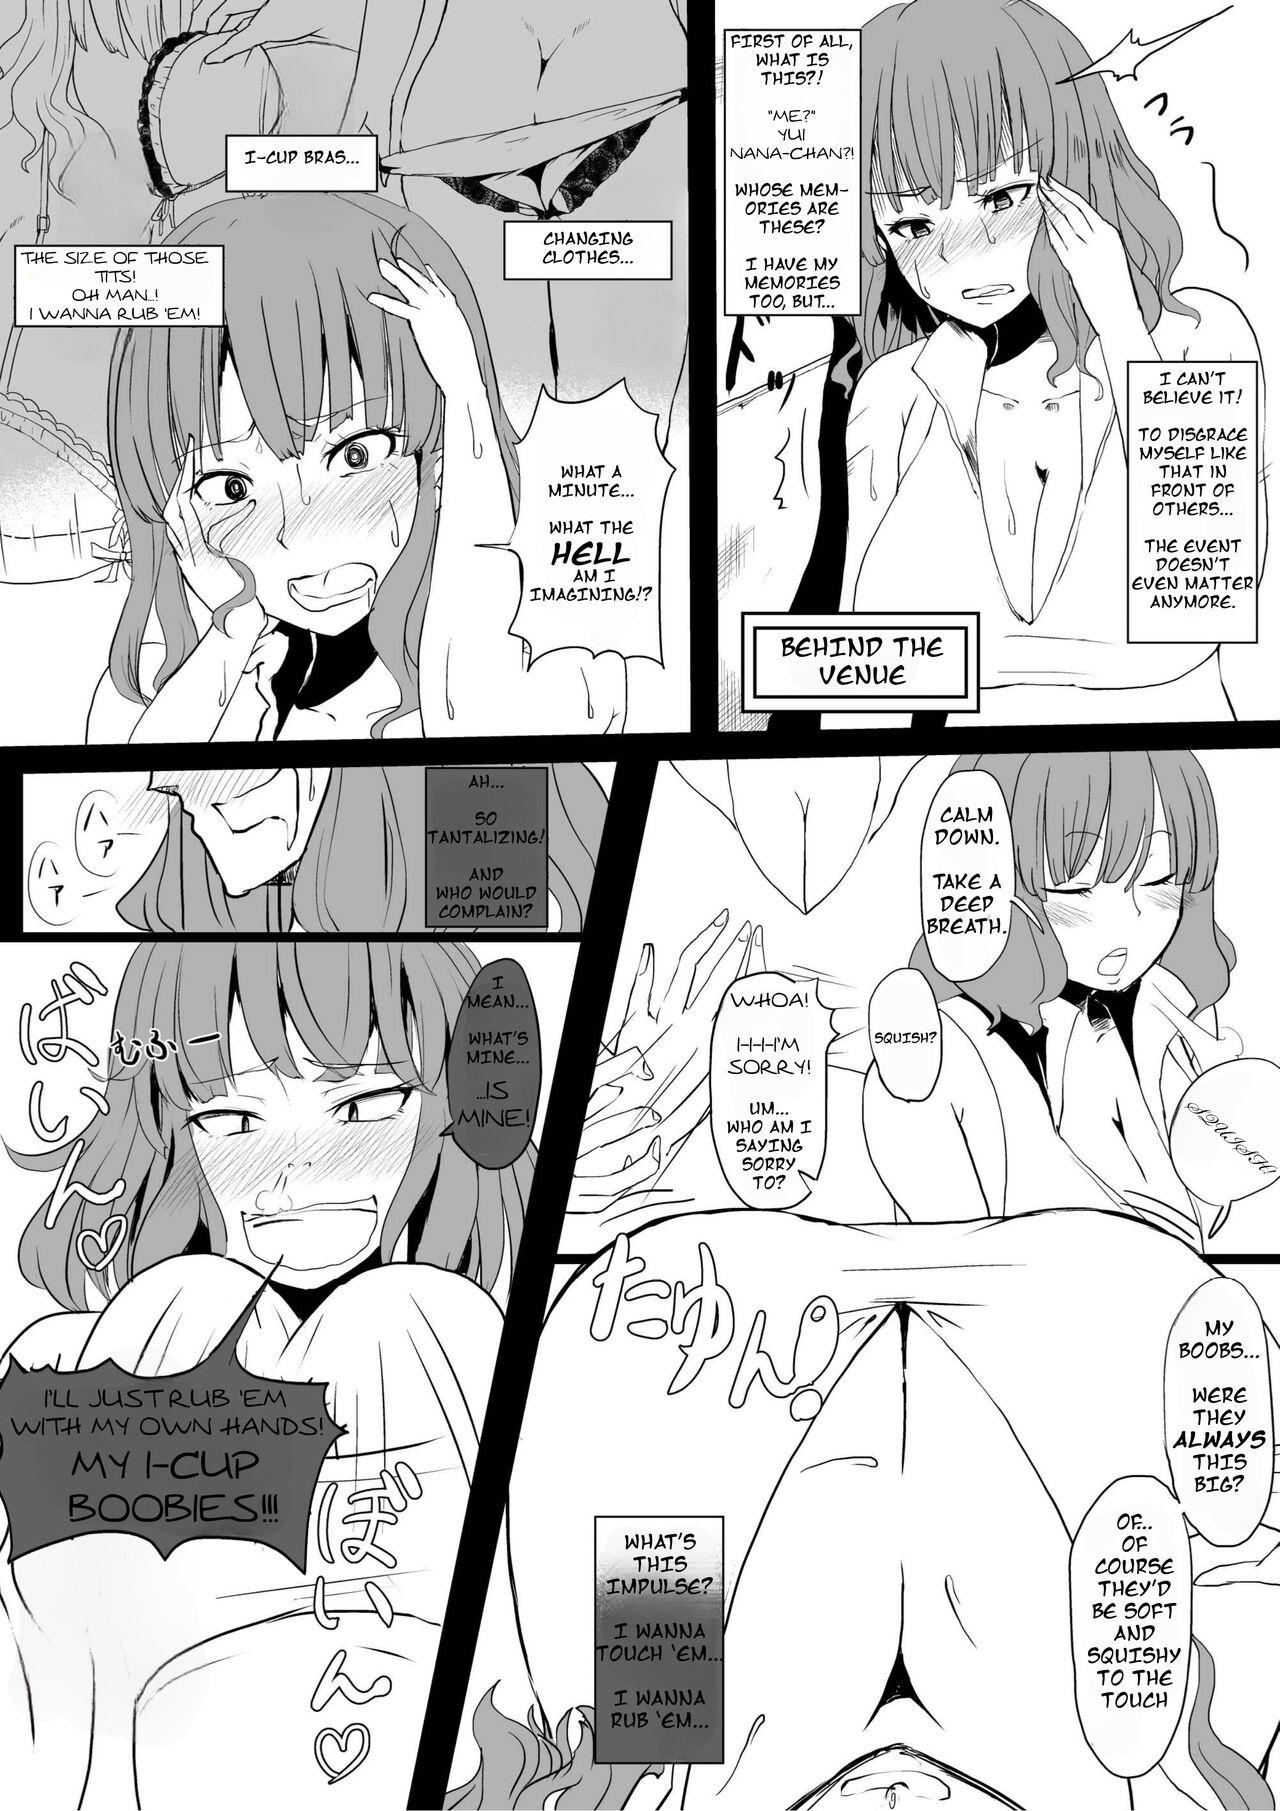 Awesome Onna no Kokoro o Ossanka Suru Camera | Changing a Woman's Heart to an Old Man's With a Camera - Original Hot Wife - Page 10